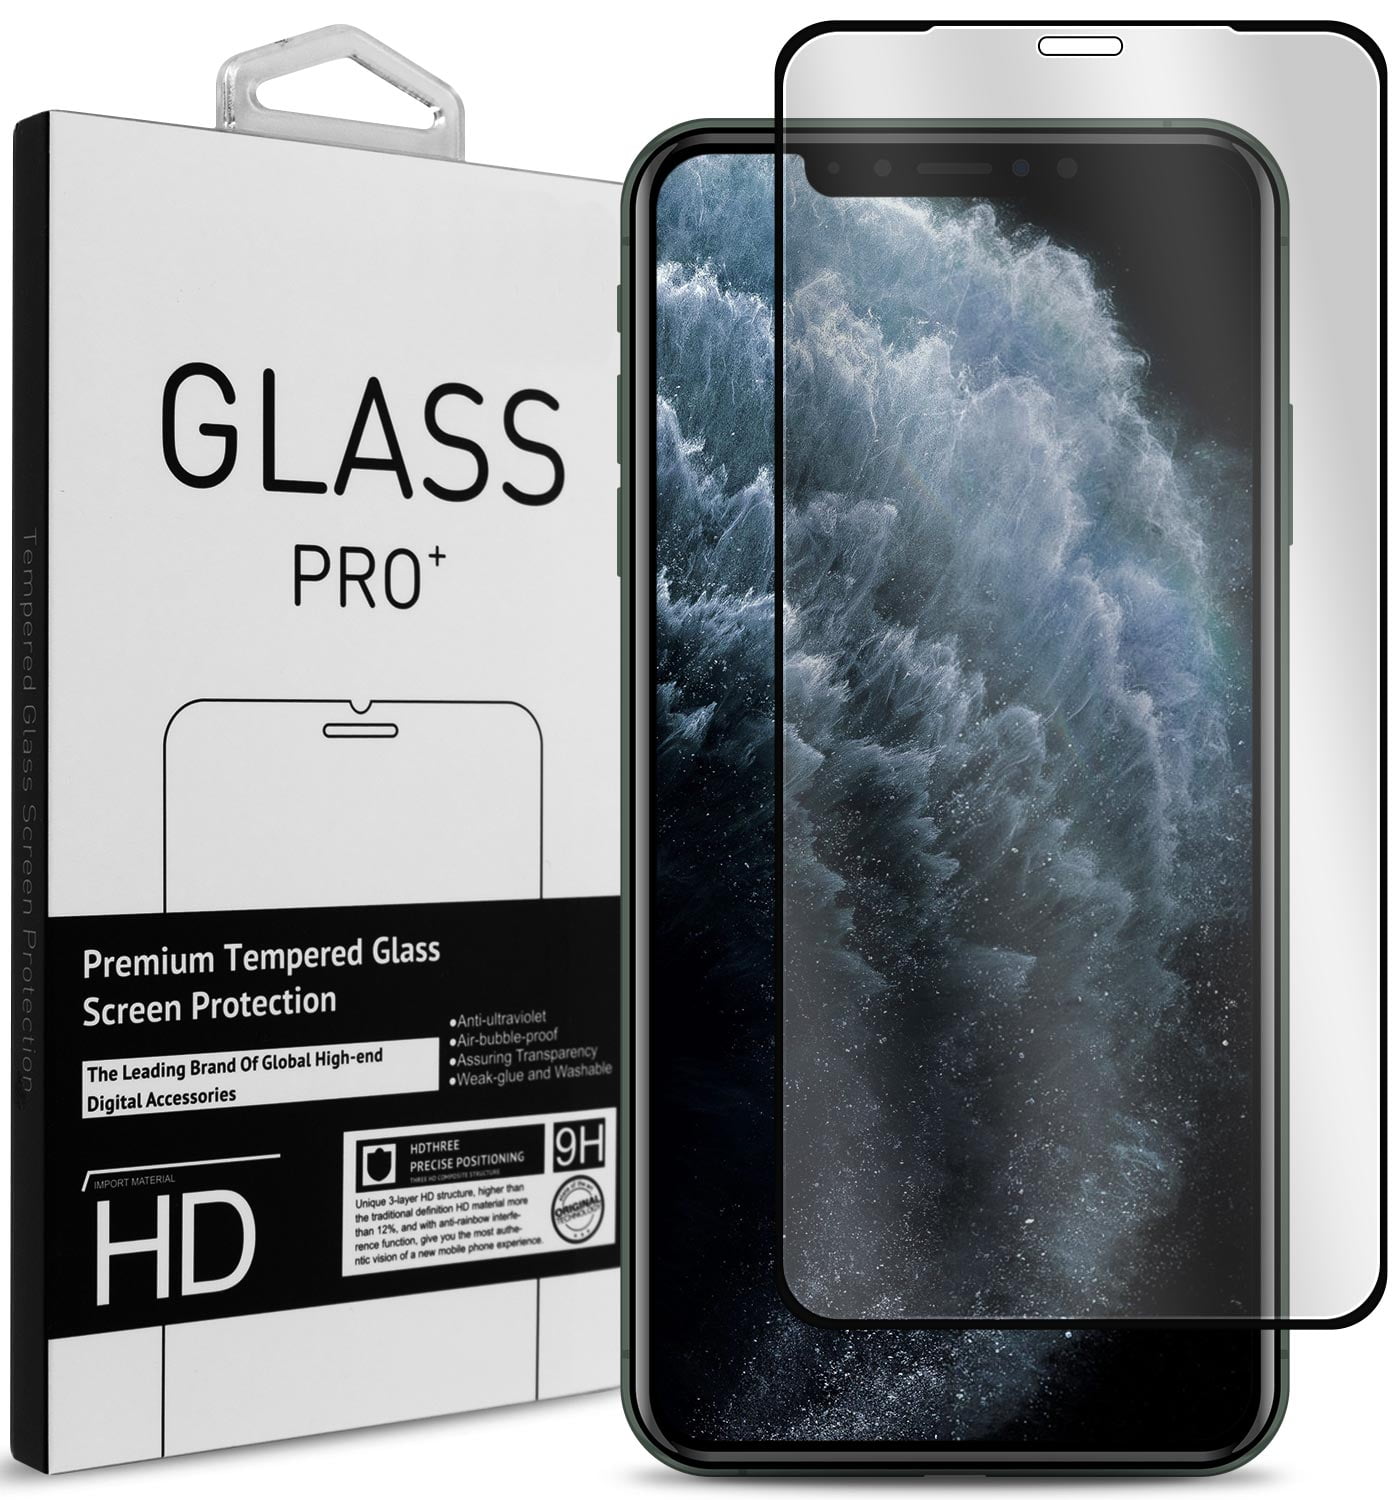 x10 Full 9H Tempered Glass Apple iPad PRO 11 inch screen protector 2018 2019 